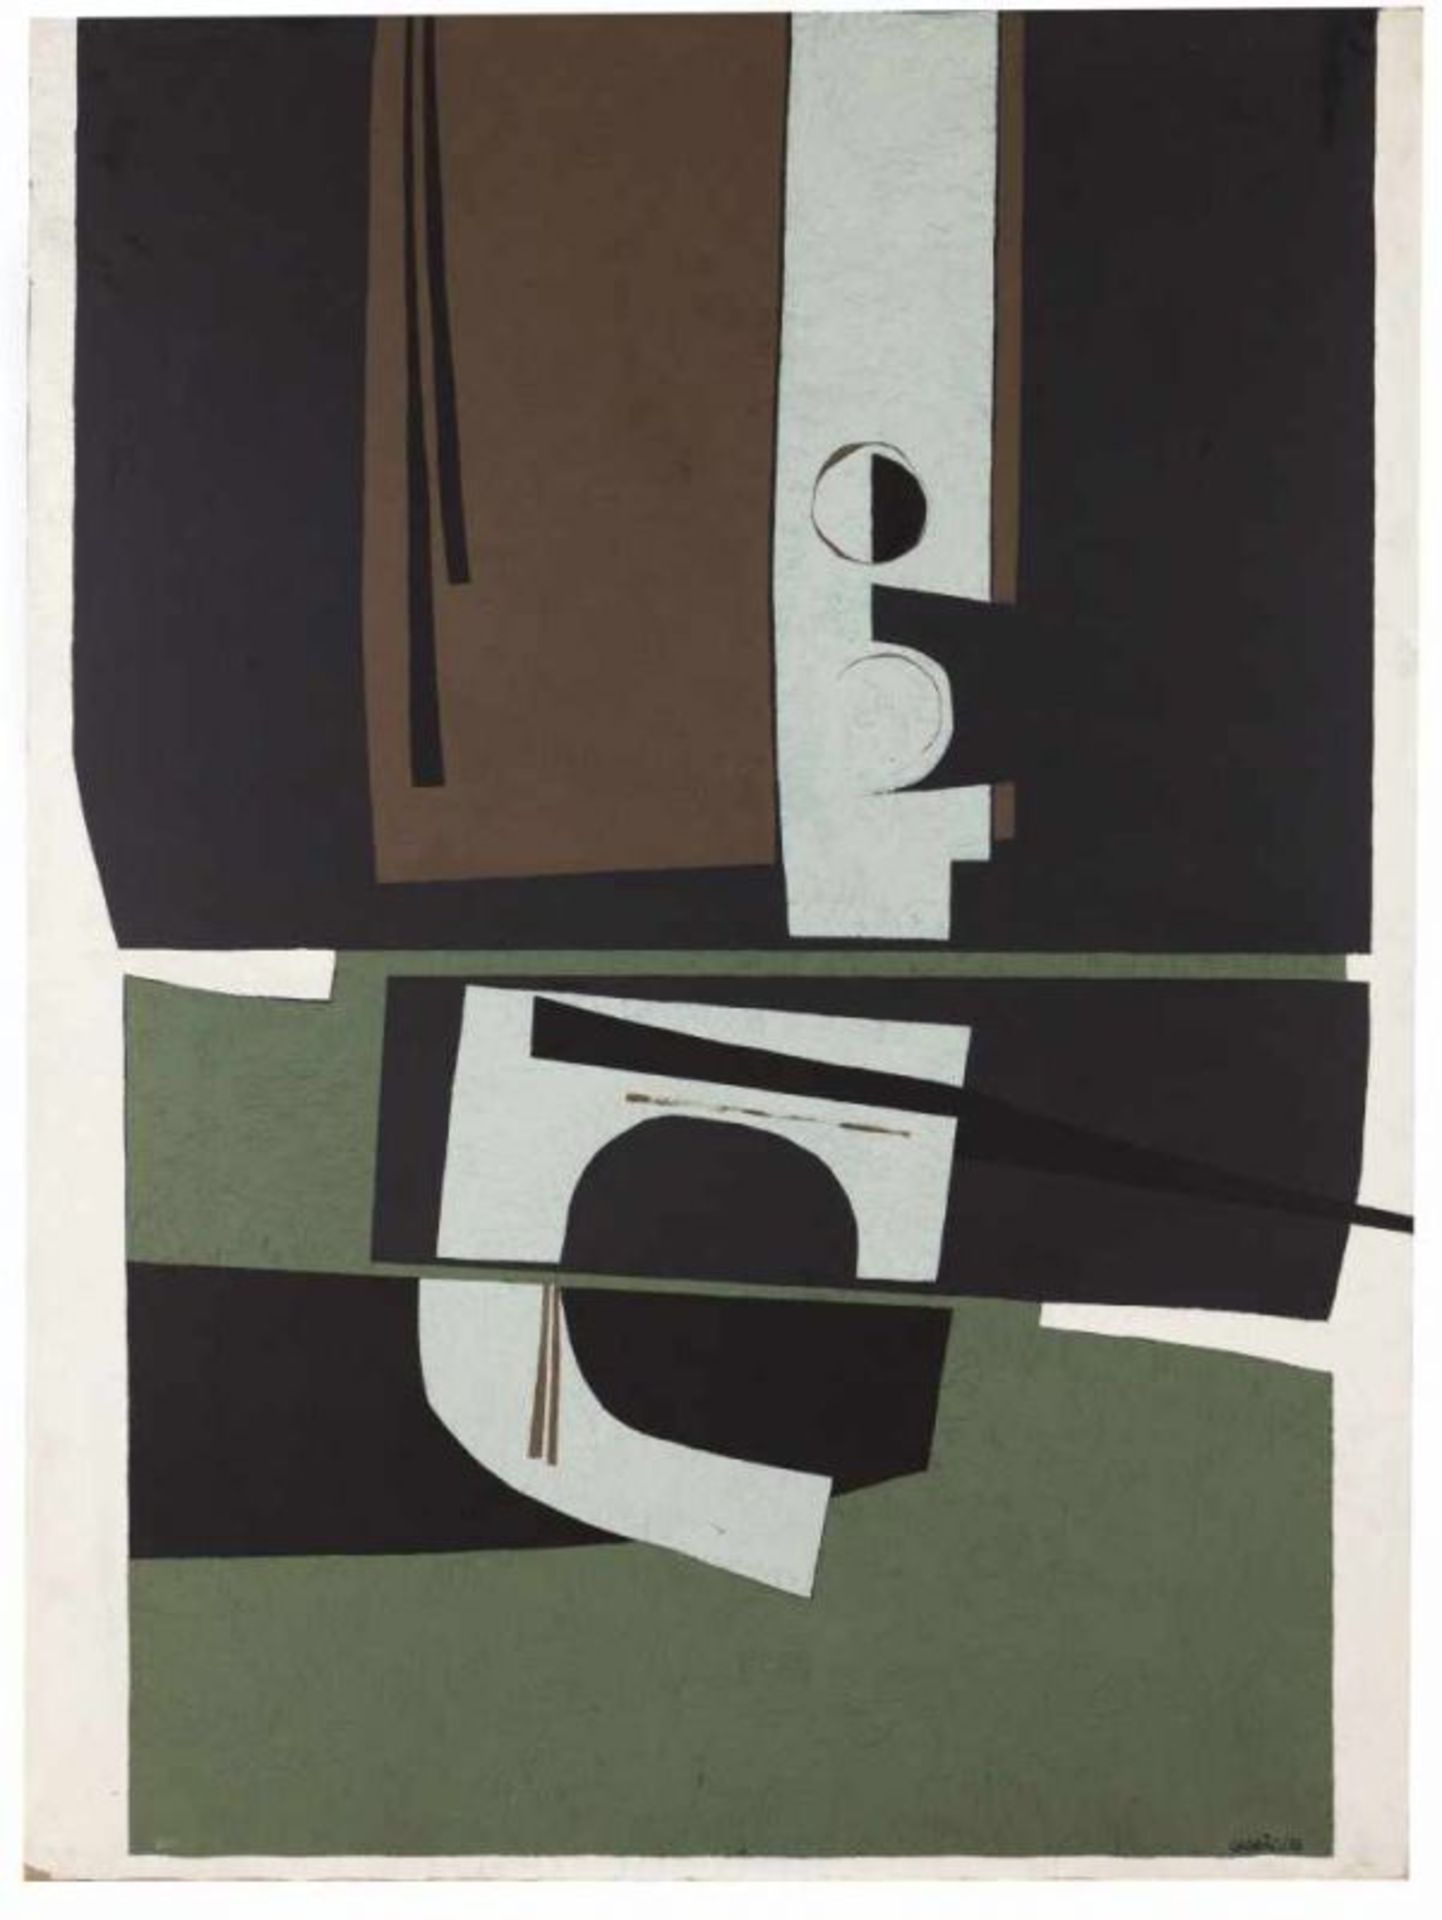 Pedro Chorão (n. 1945)UntitledAcrylic on canvasSigned and dated 74 front and back130x97 cm